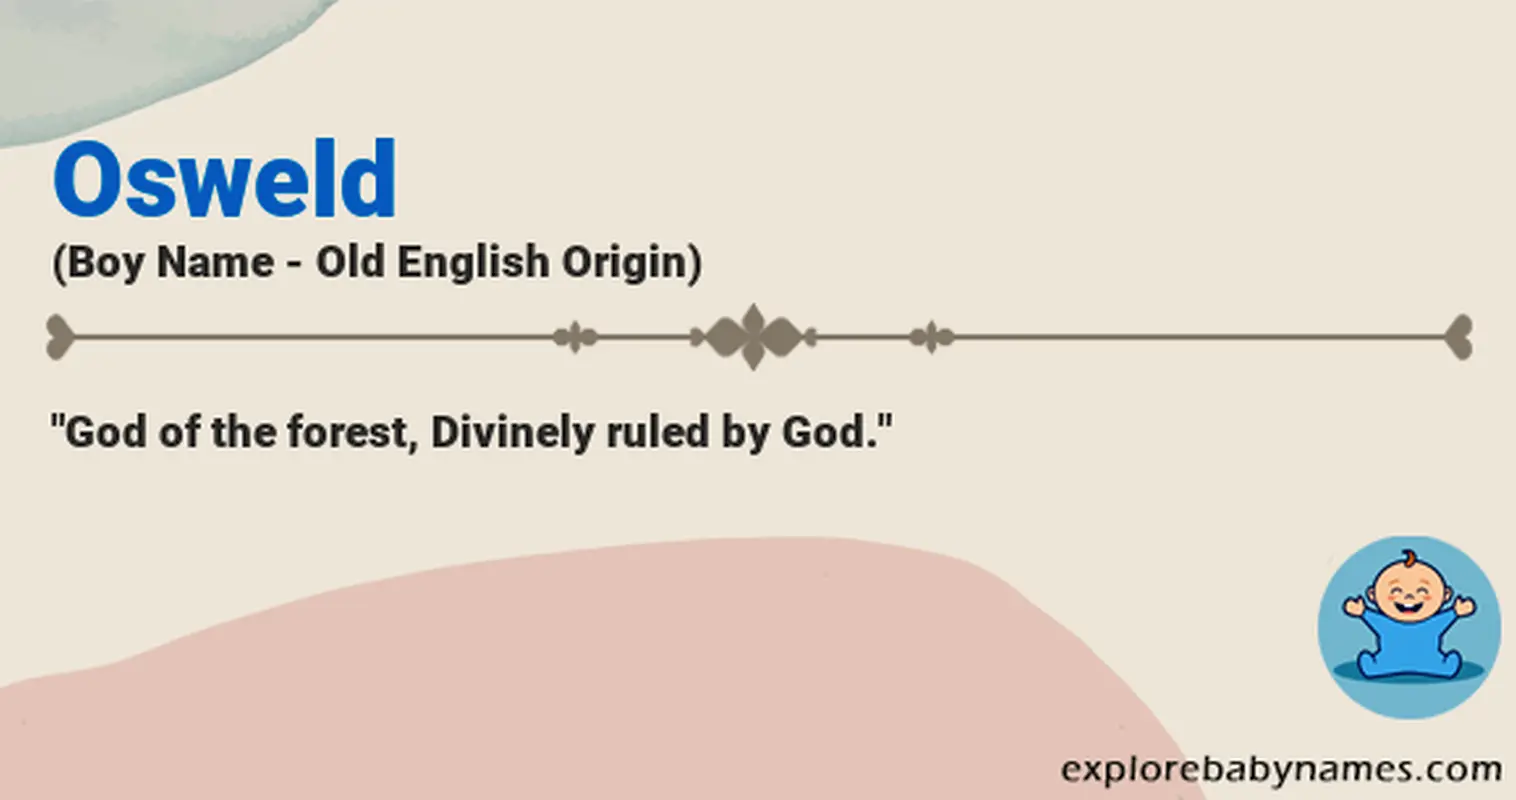 Meaning of Osweld